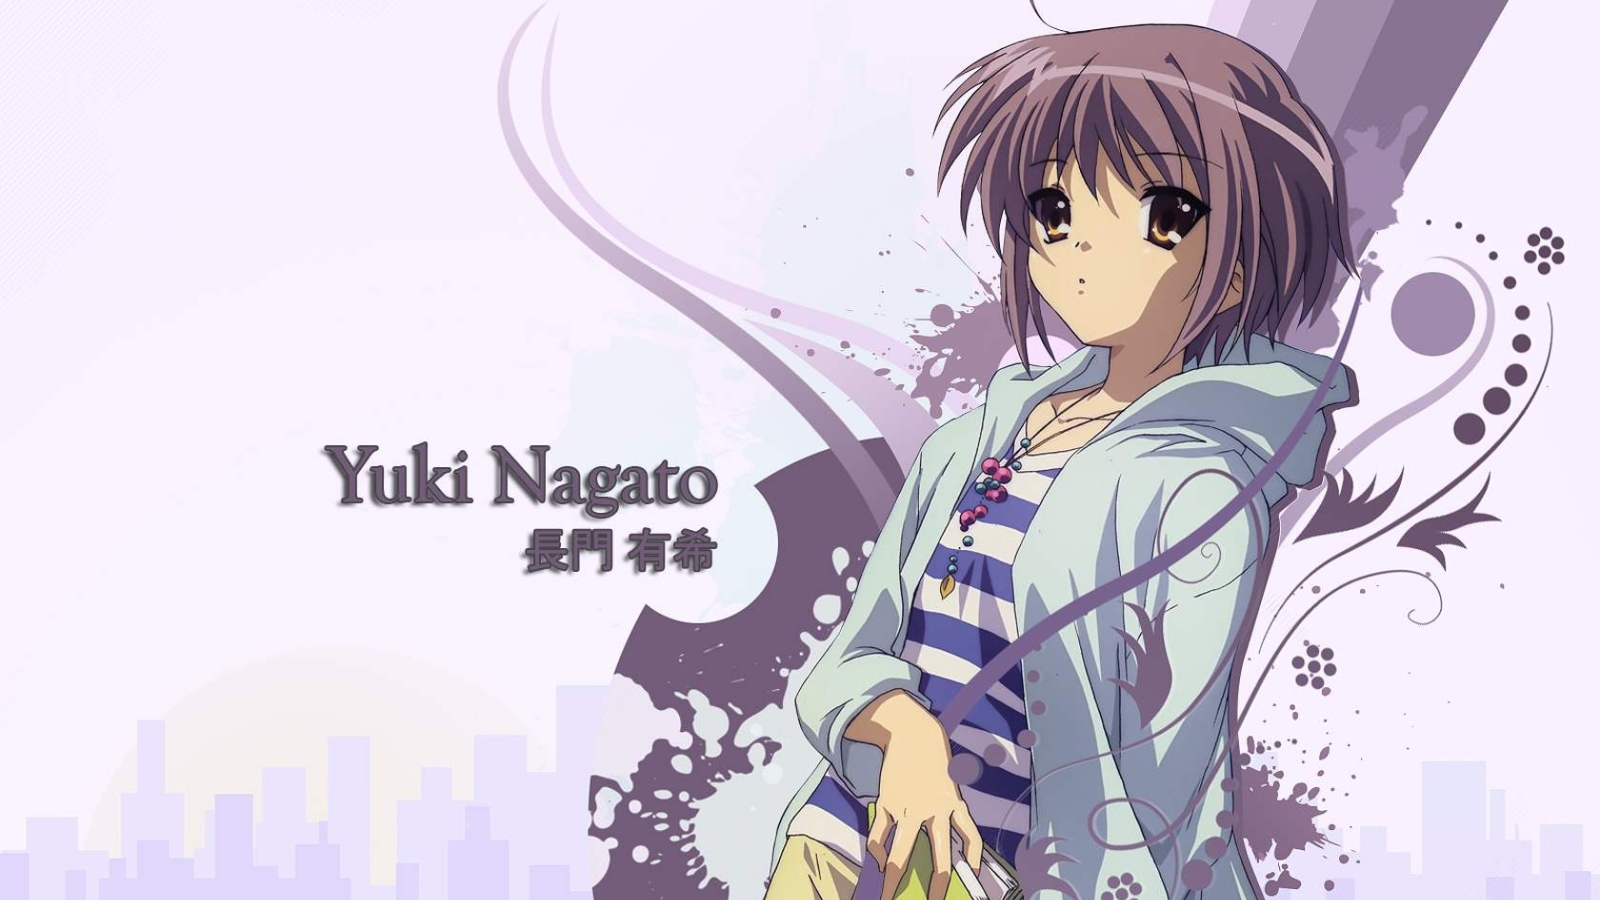 1600x900 Yuki Nagato Girl Look 1600x900 Resolution Wallpaper Hd Anime 4k Wallpapers Images Photos And Background